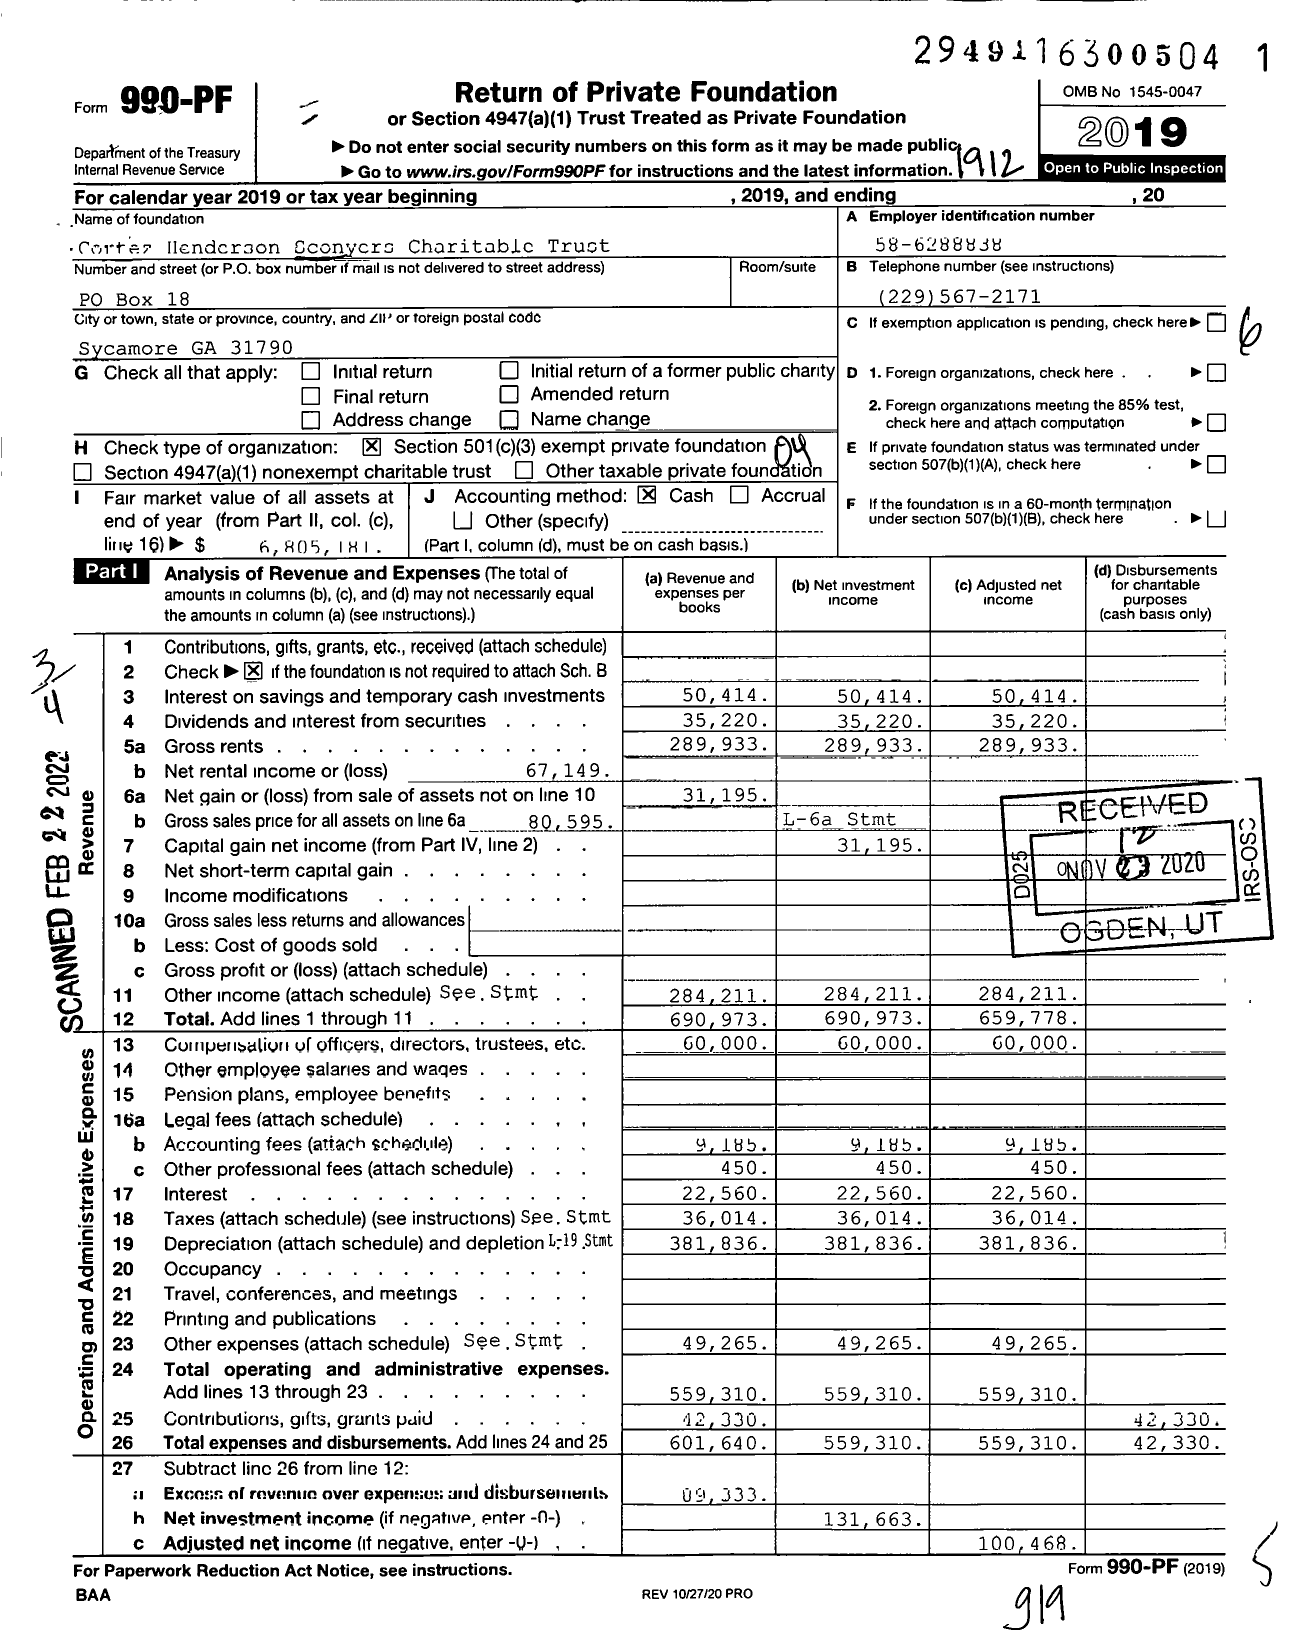 Image of first page of 2019 Form 990PF for Cortez Henderson Sconyers Charitable Trust